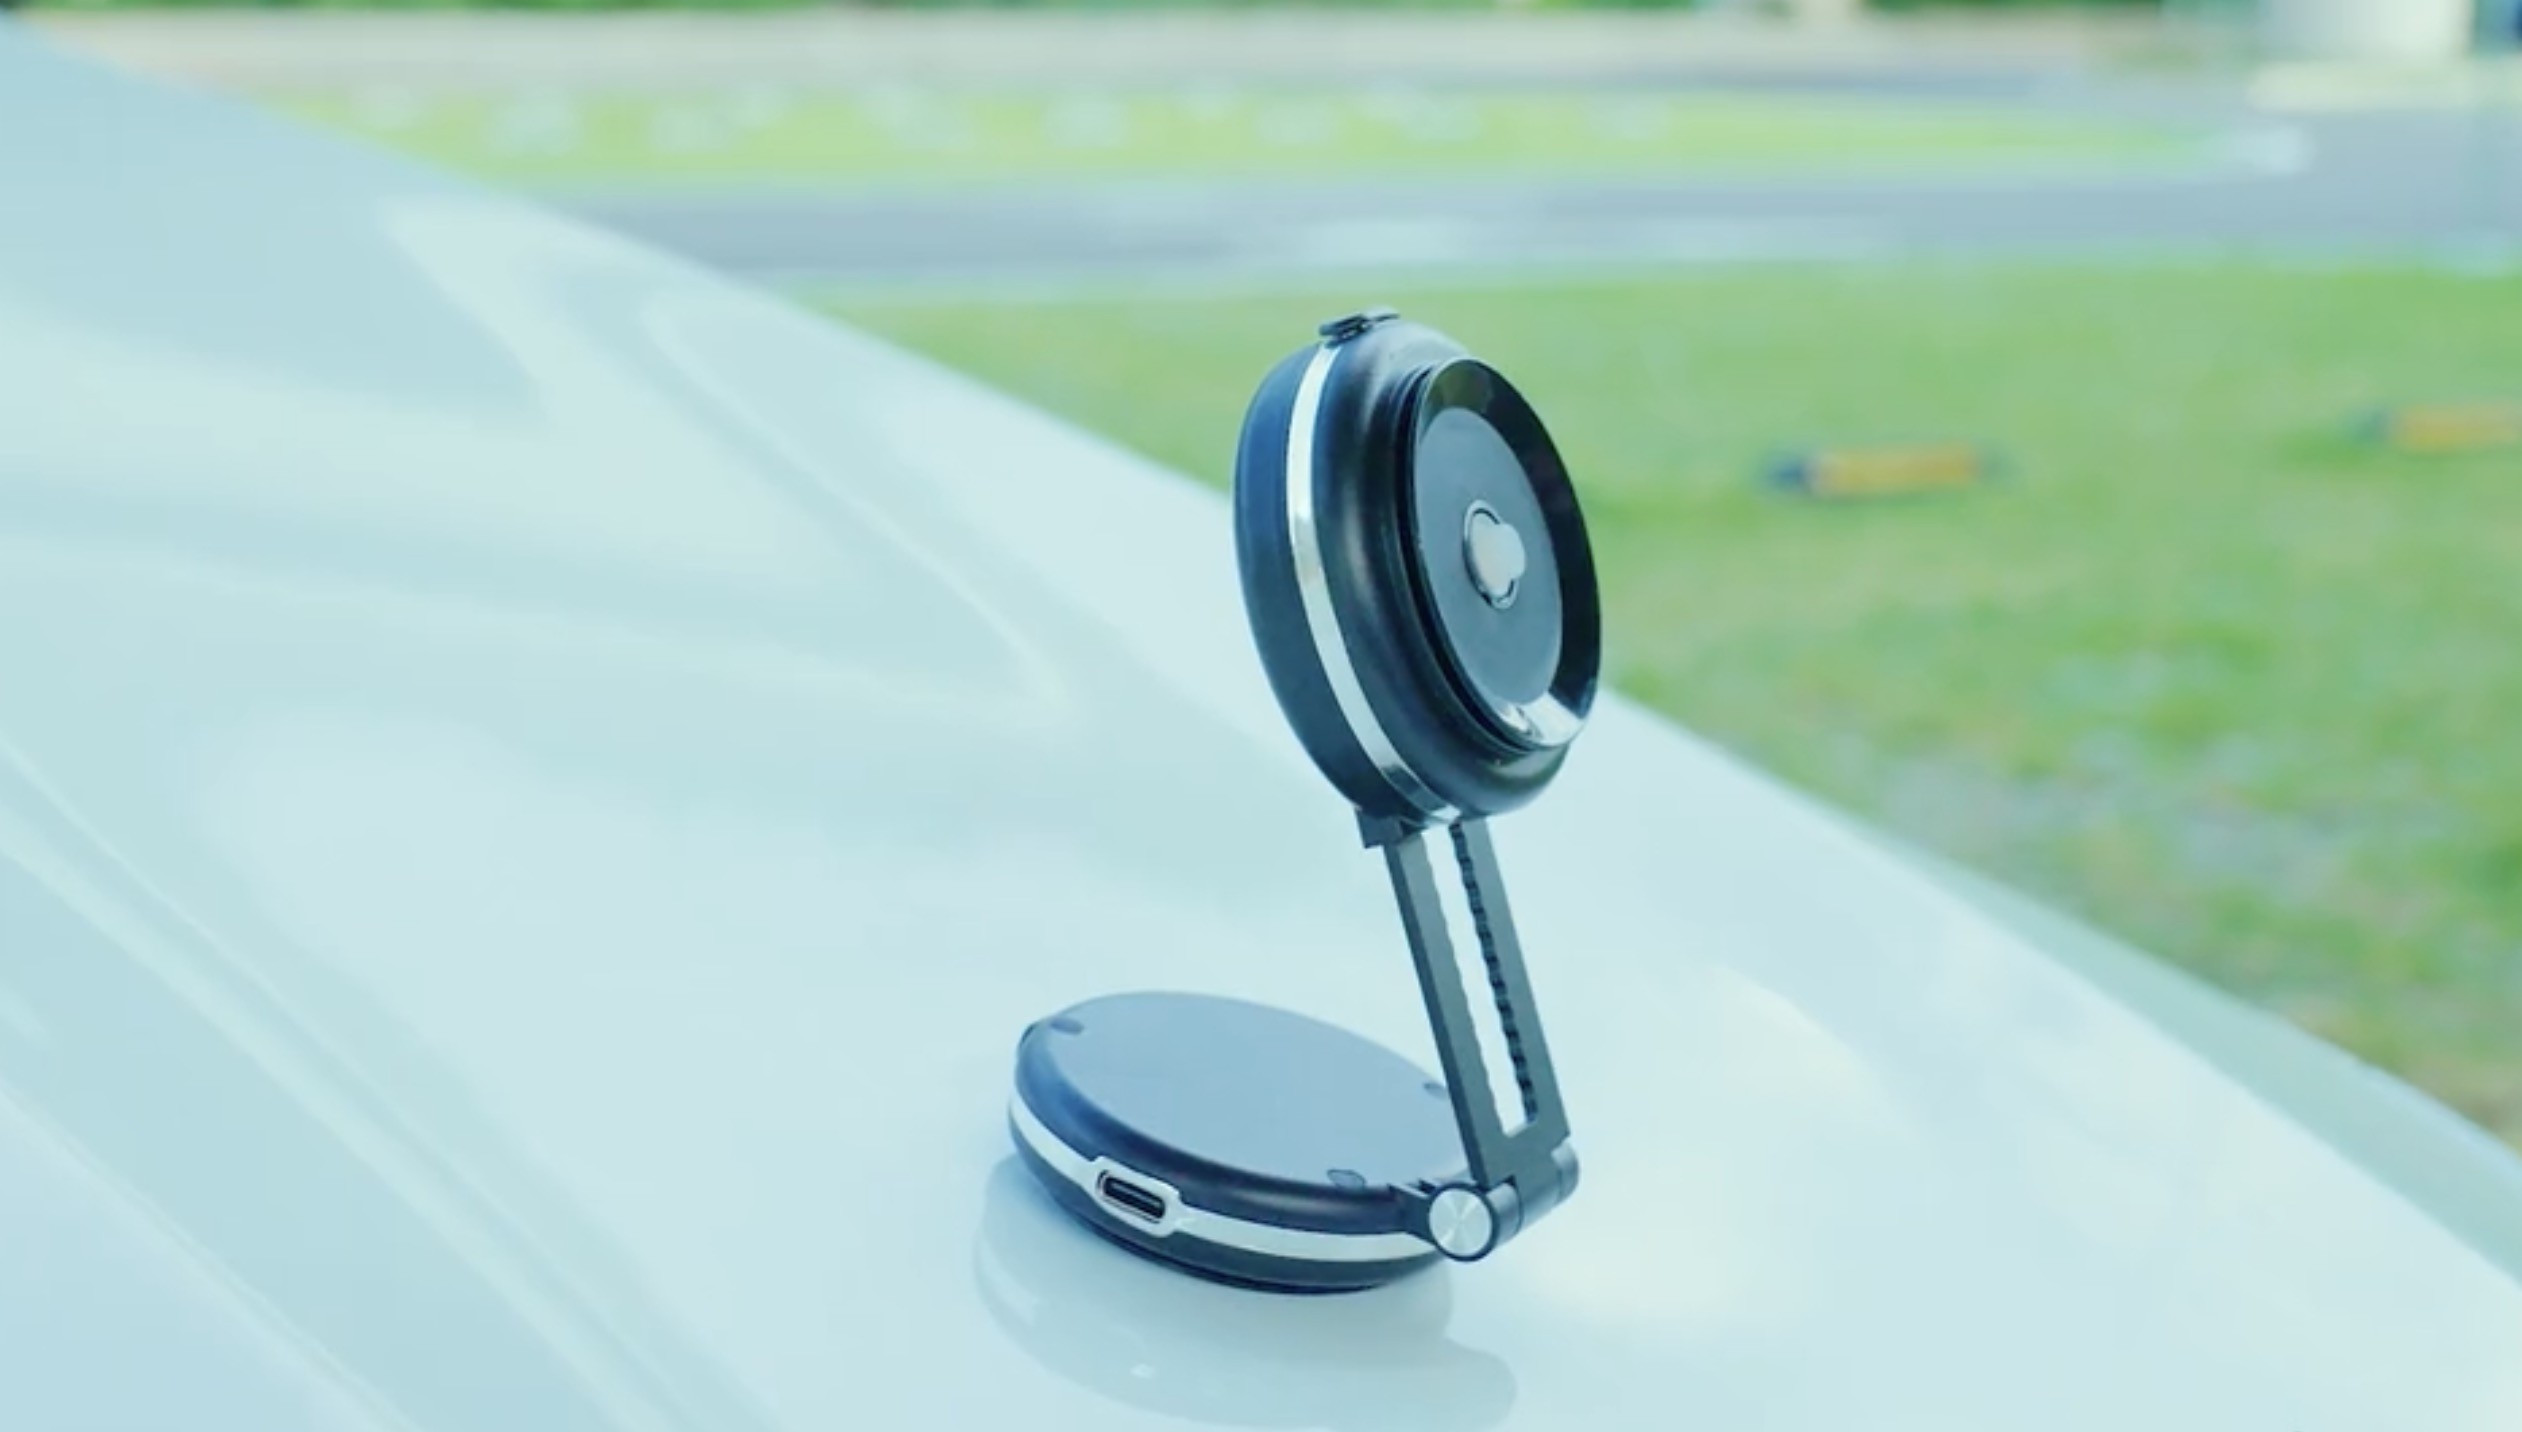 https://s1.cdn.autoevolution.com/images/news/gallery/someone-created-a-vacuum-phone-holder-for-cars-and-it-s-ridiculously-cool_3.jpg